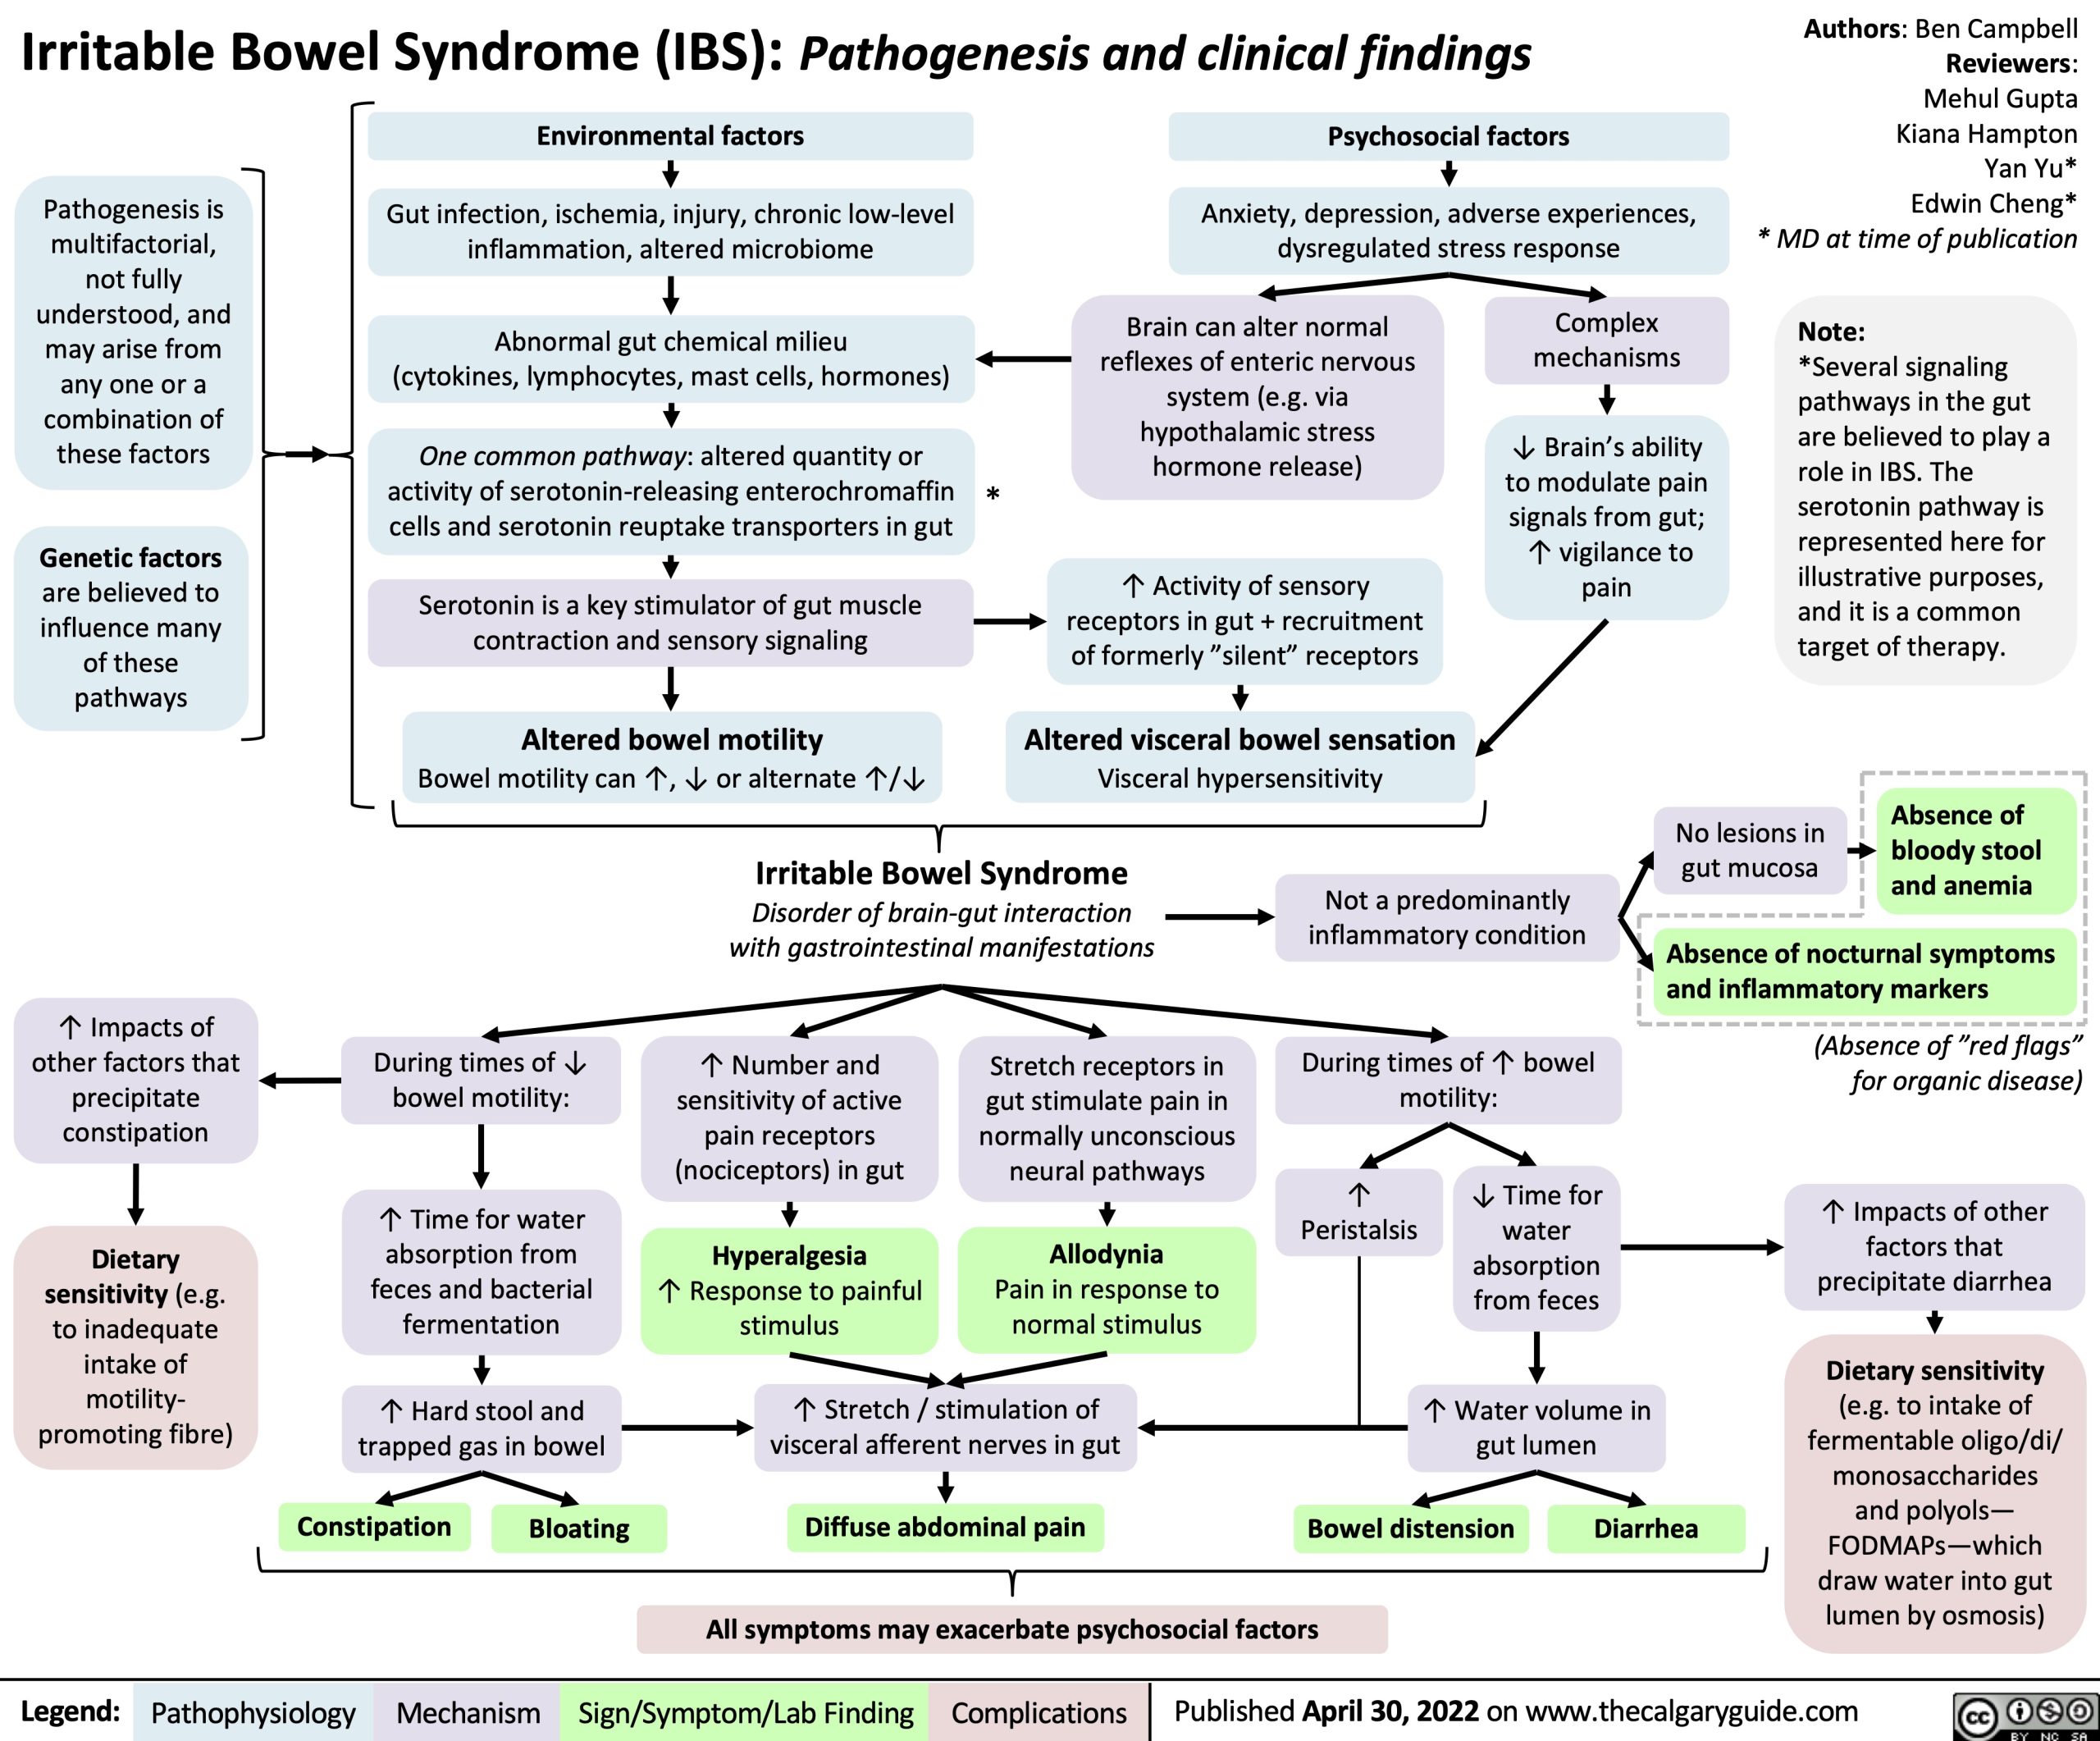 IBS Pathogenesis and Clinical Findings